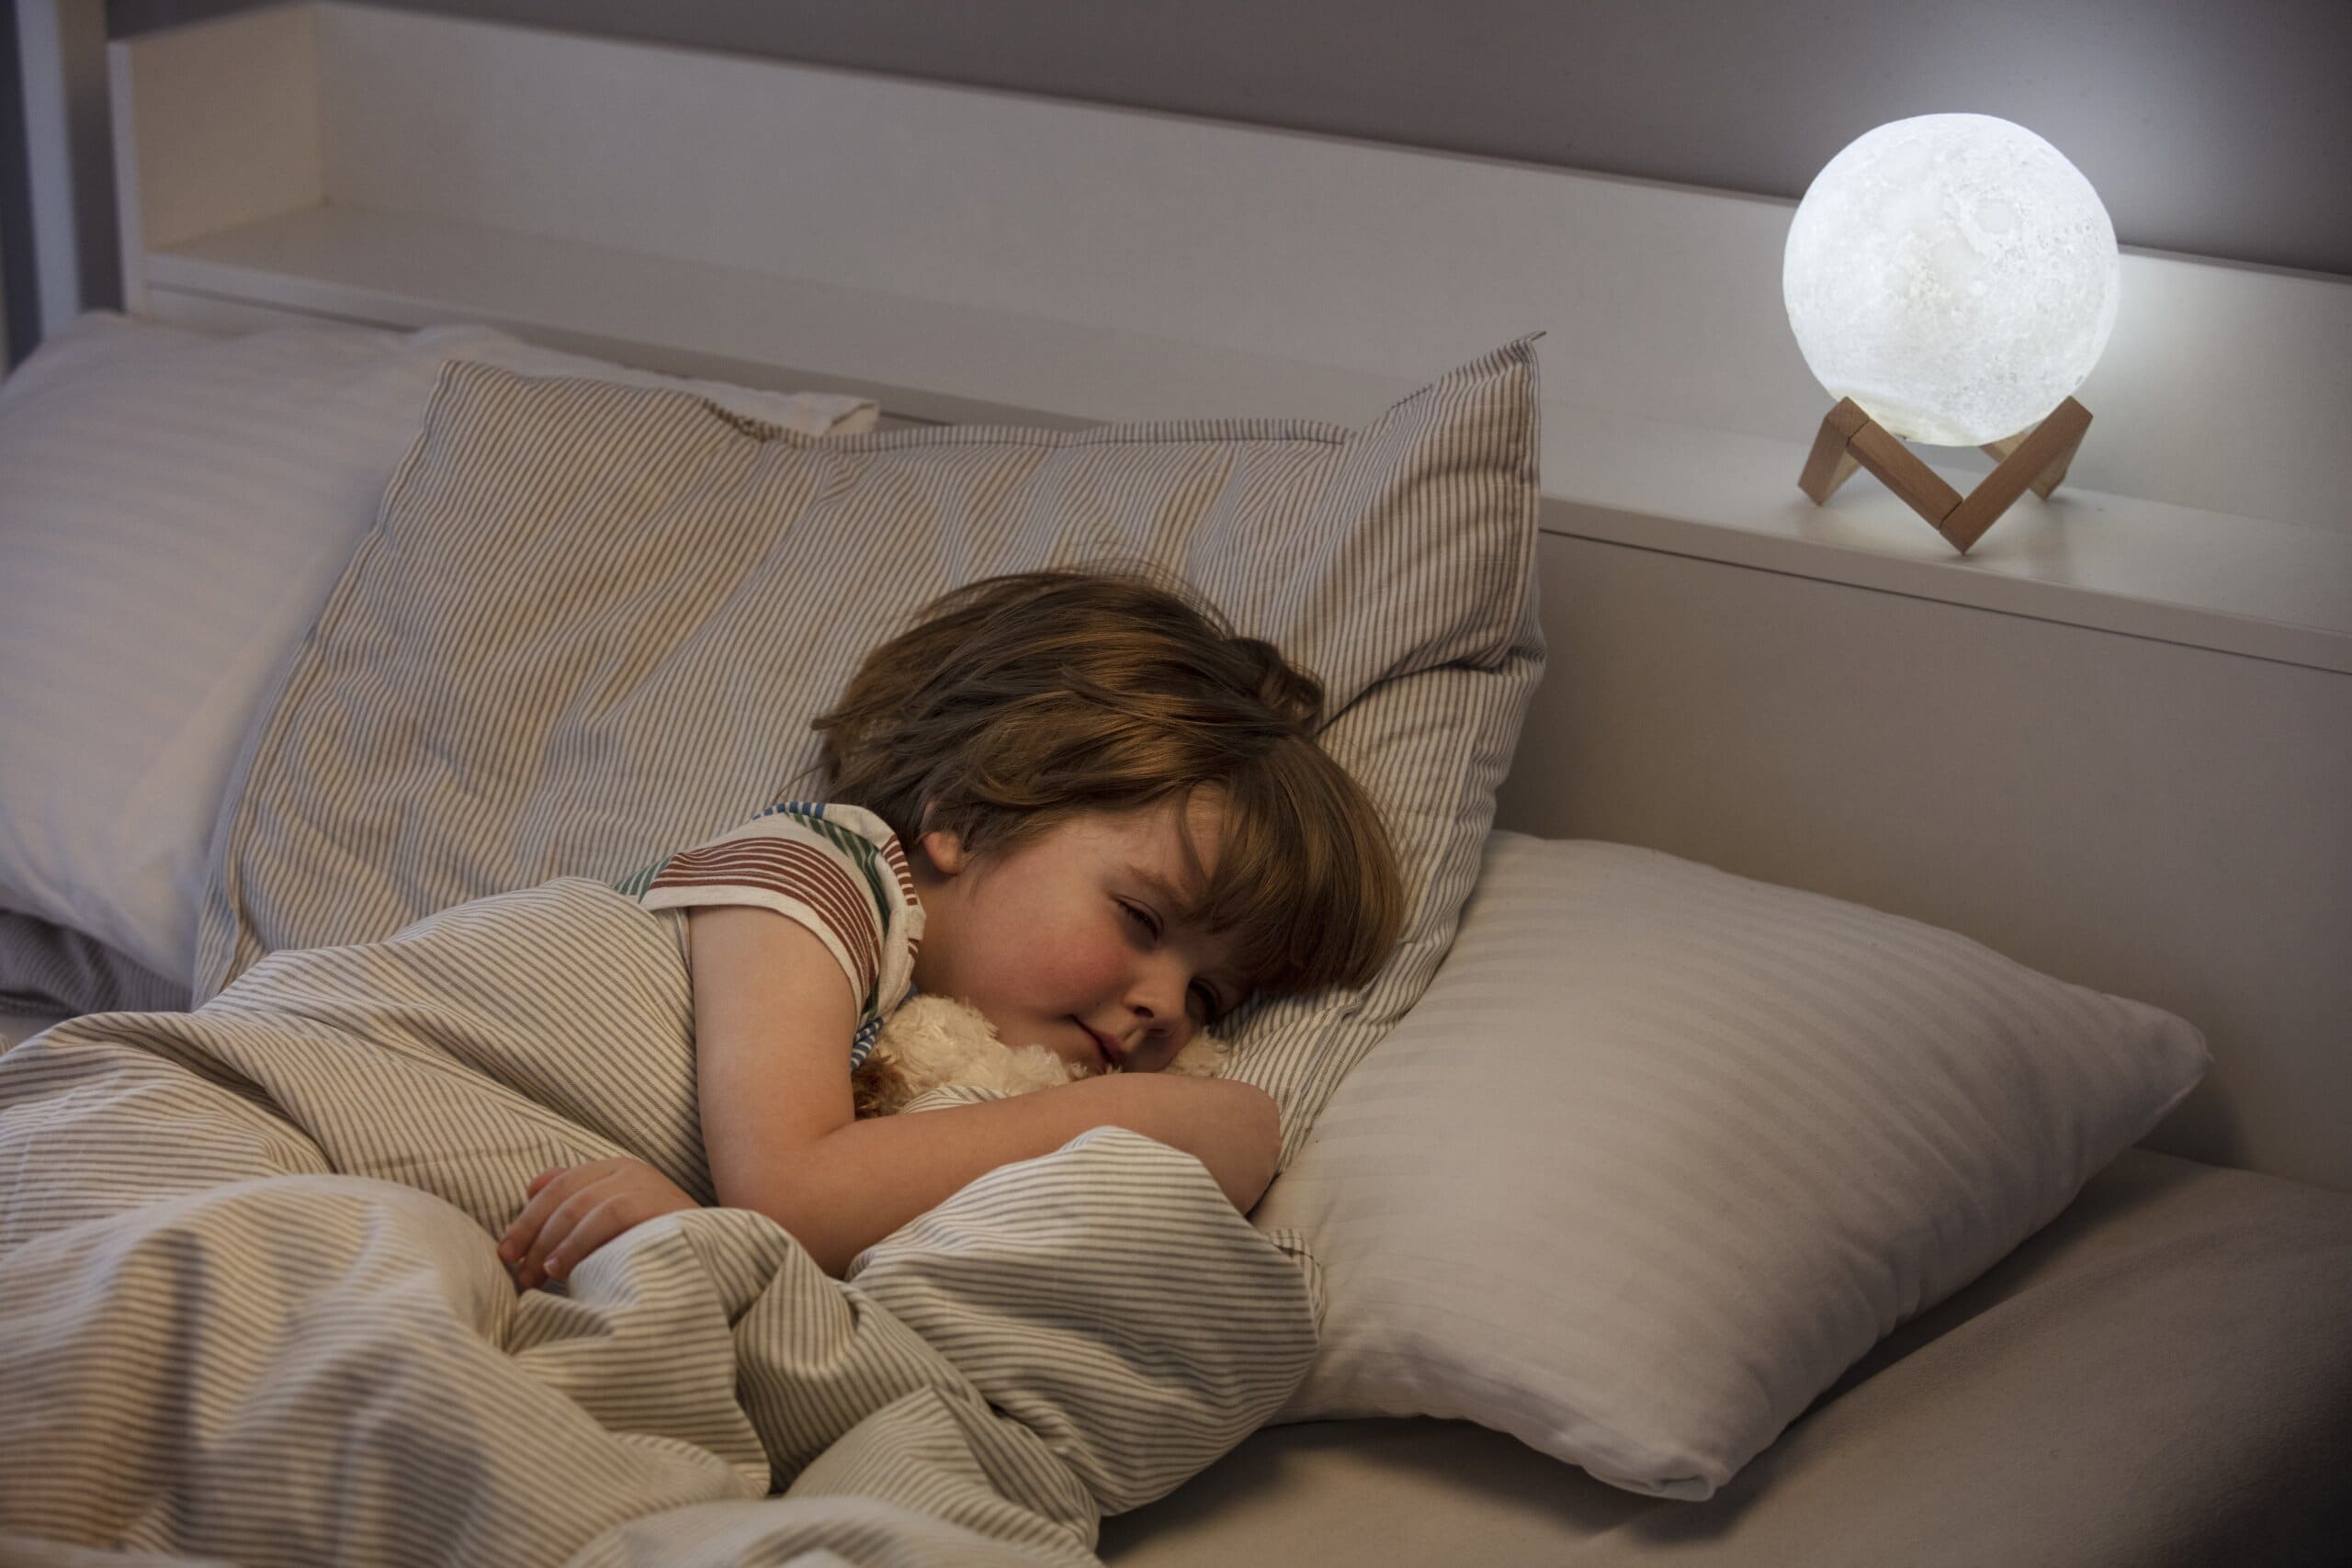 Young child sleeping in bed.